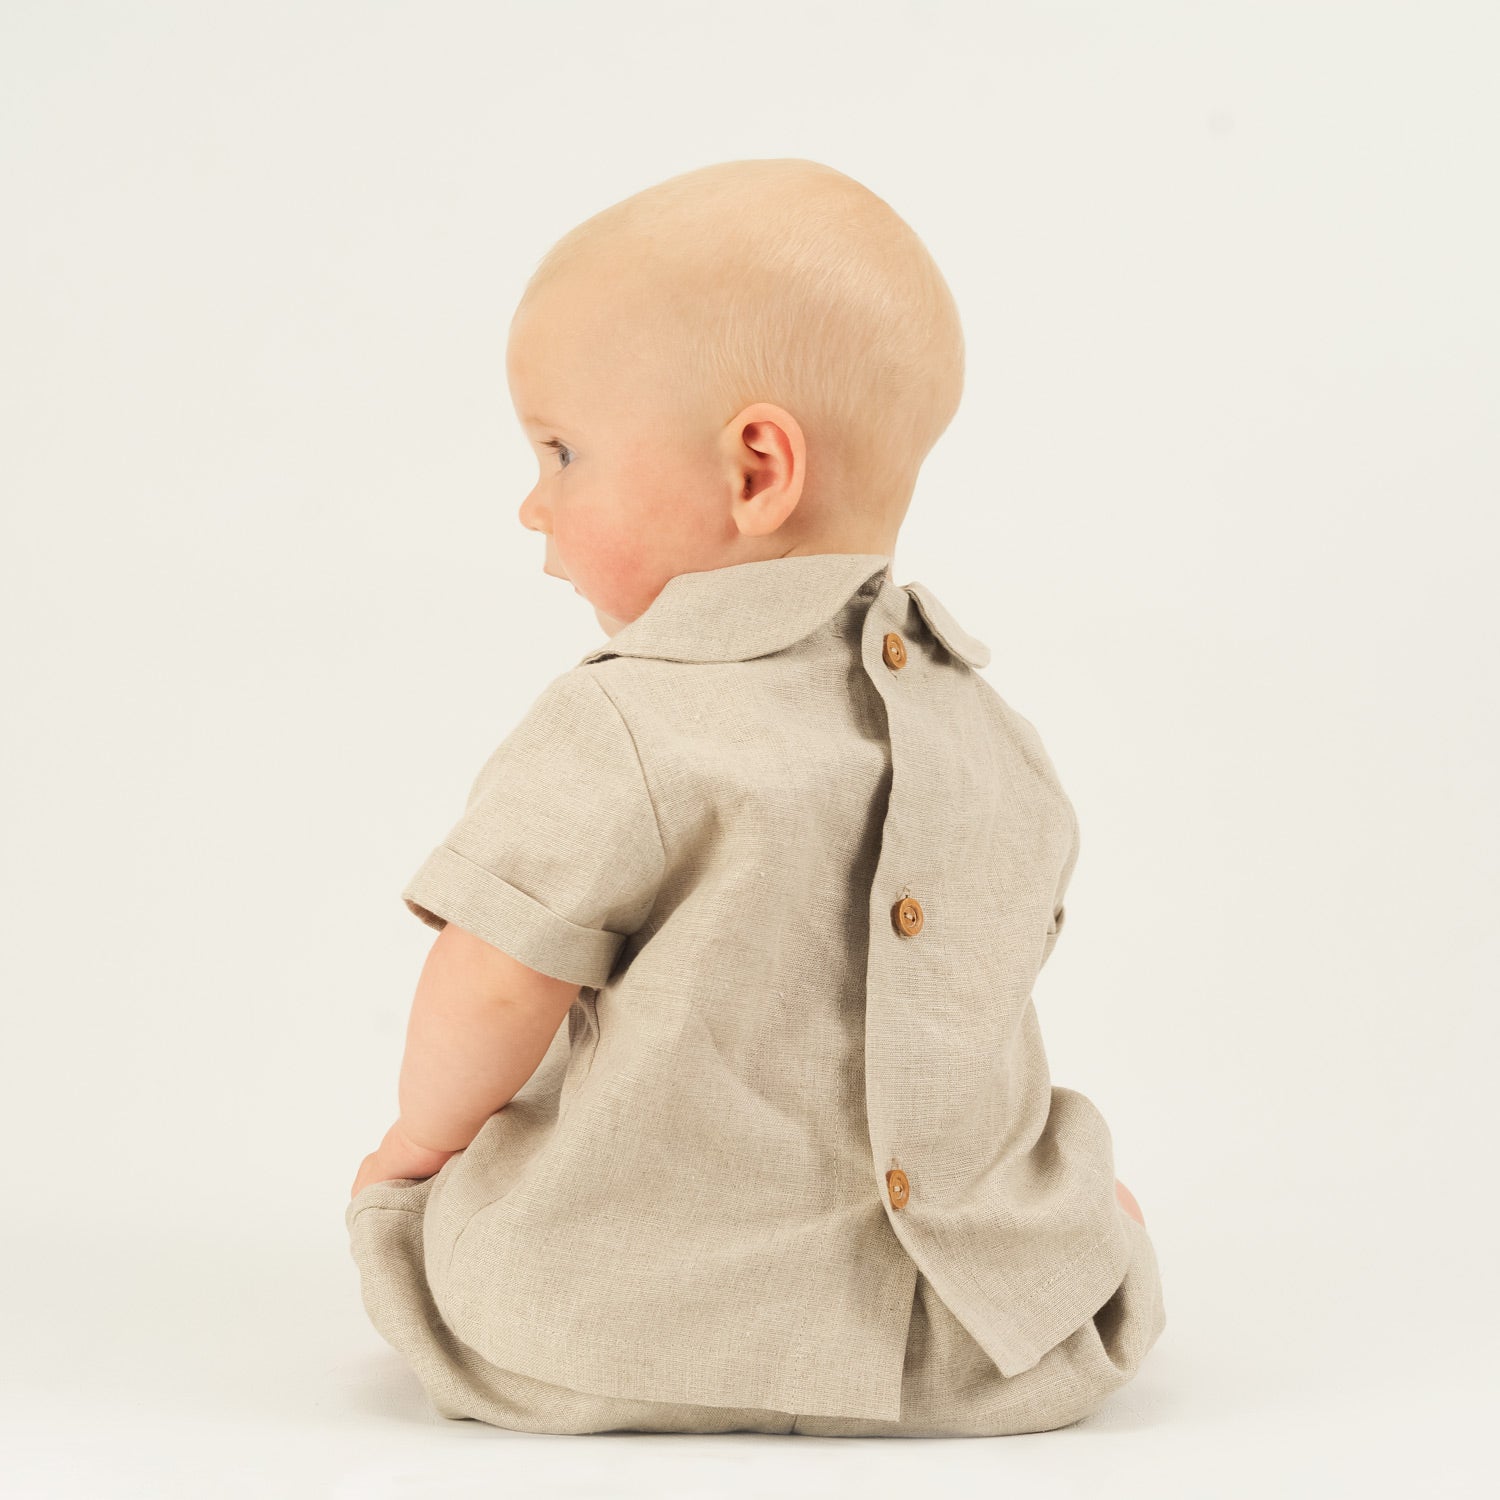 Baby Boy wearing Organic Linen Shirt and Bloomers